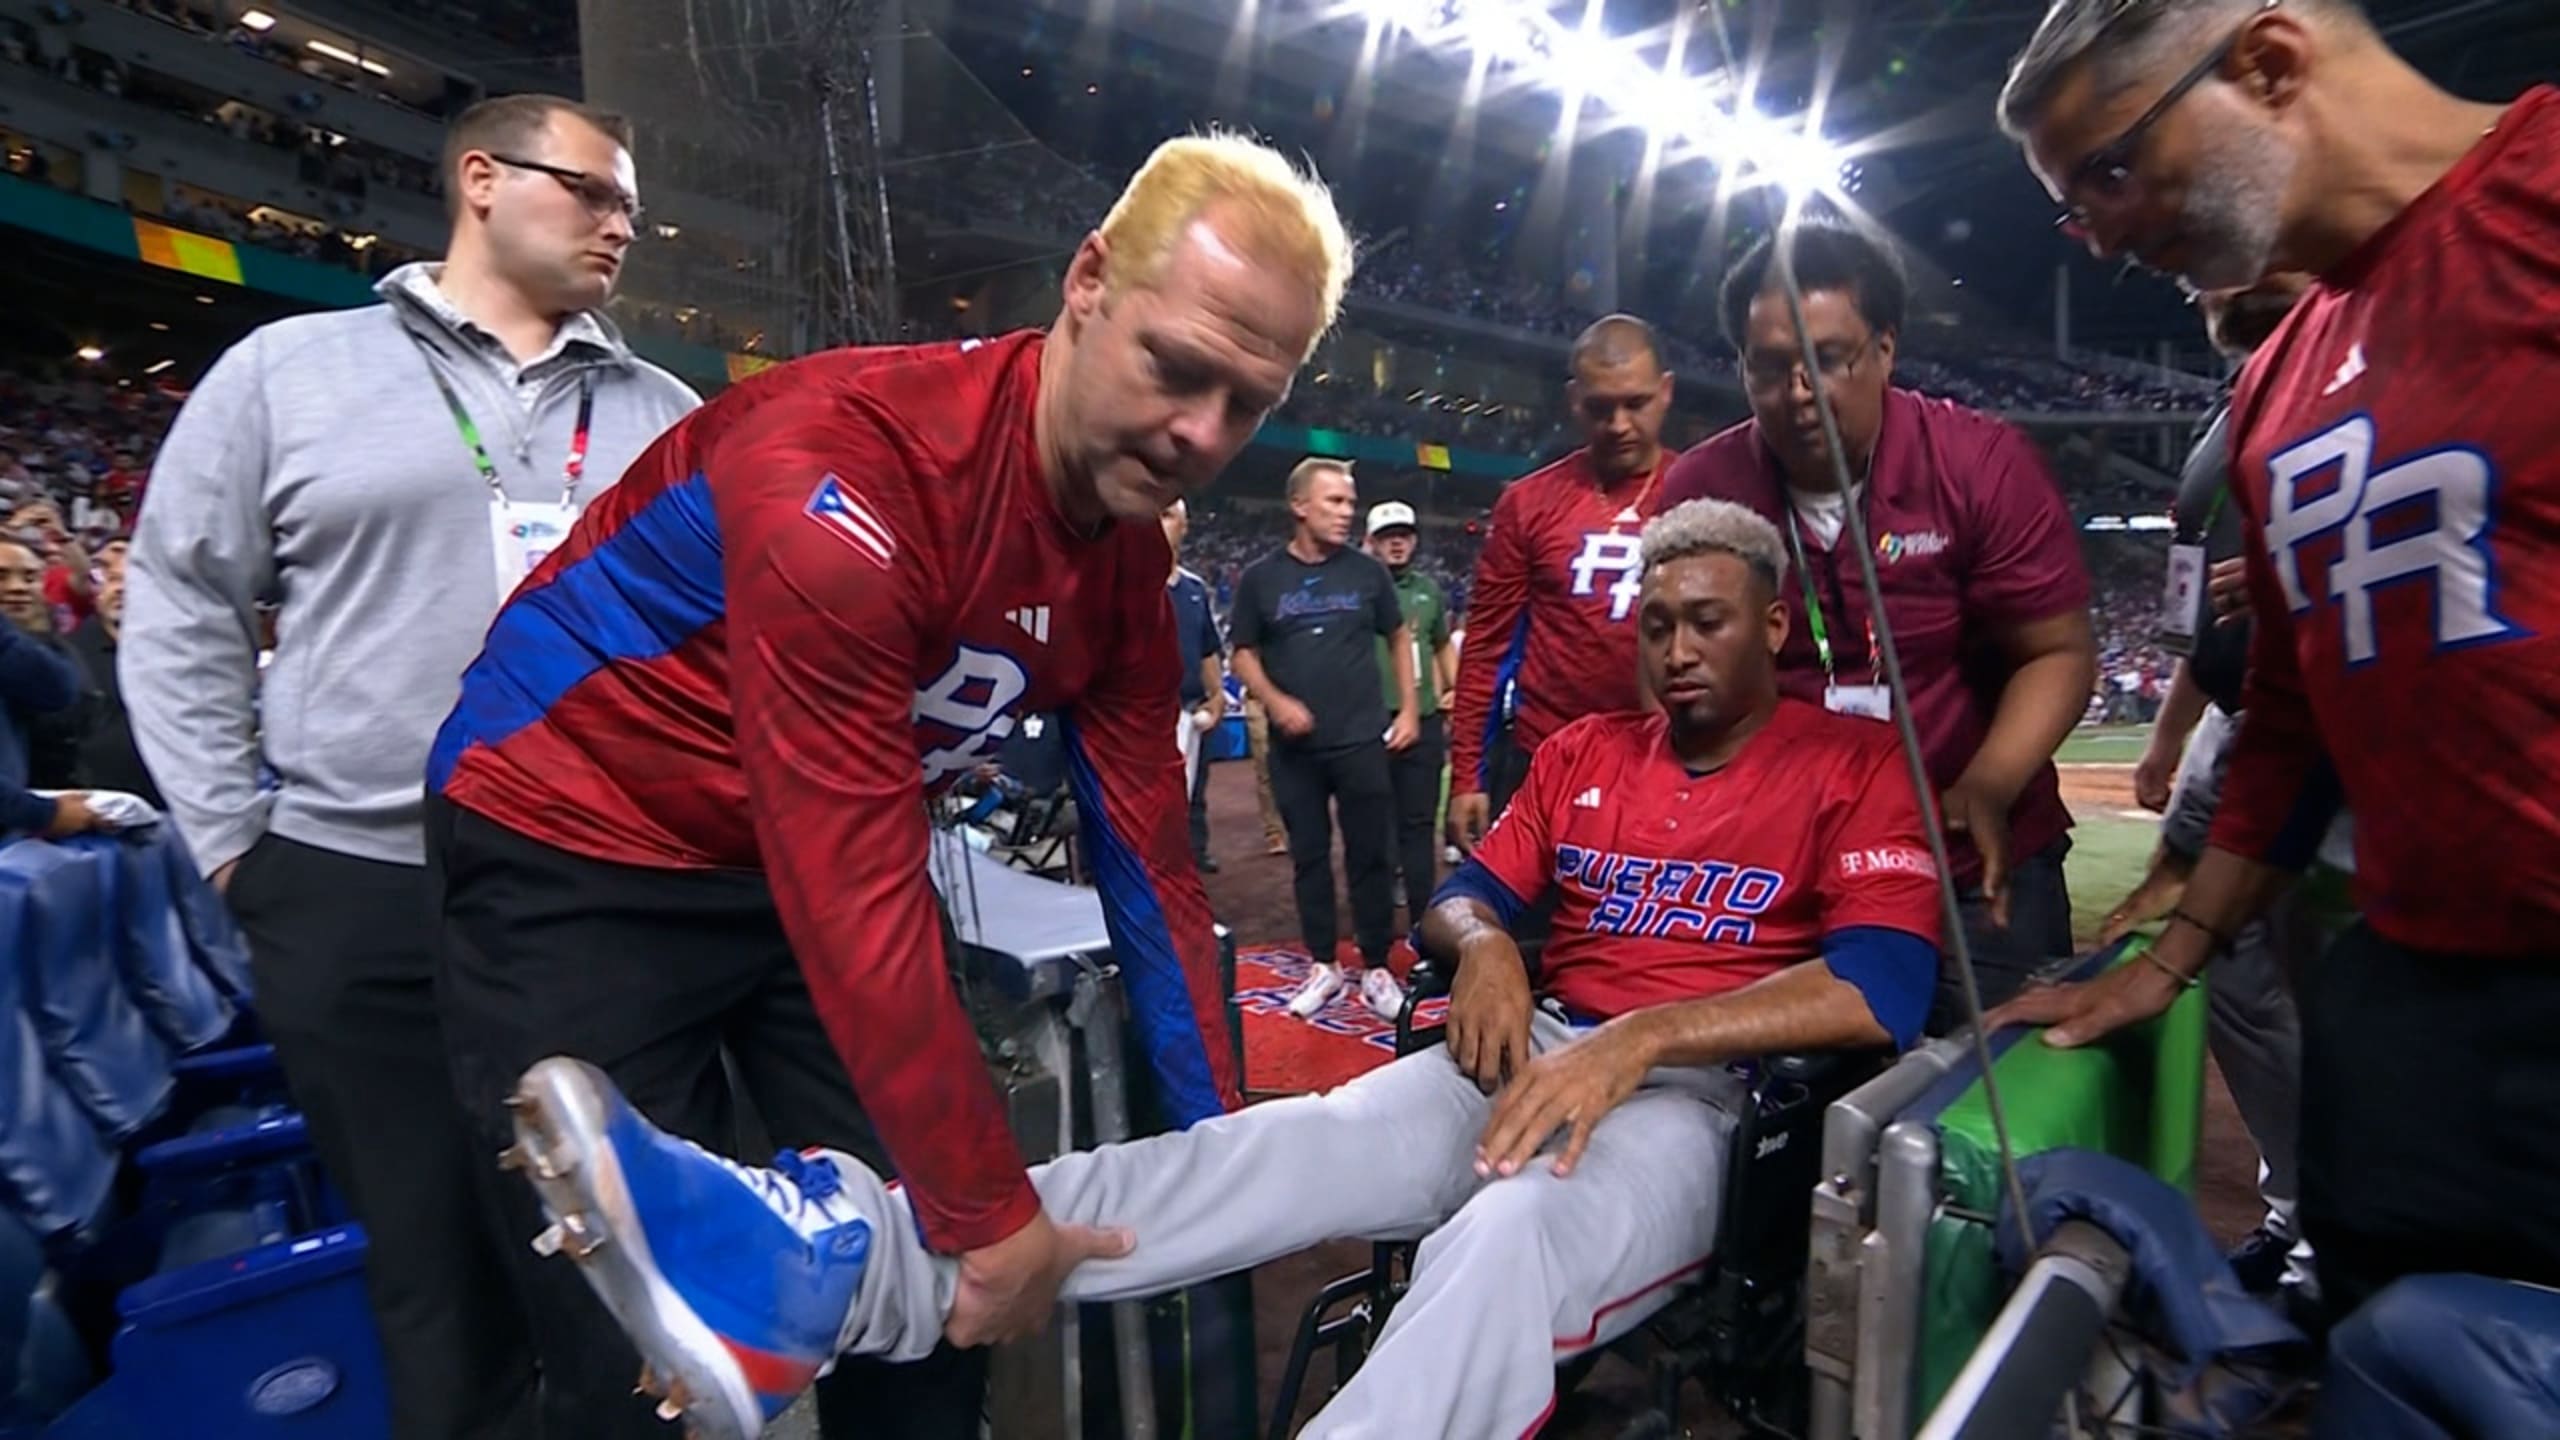 Edwin Díaz's injury is an awful blow for the Mets, but the WBC's